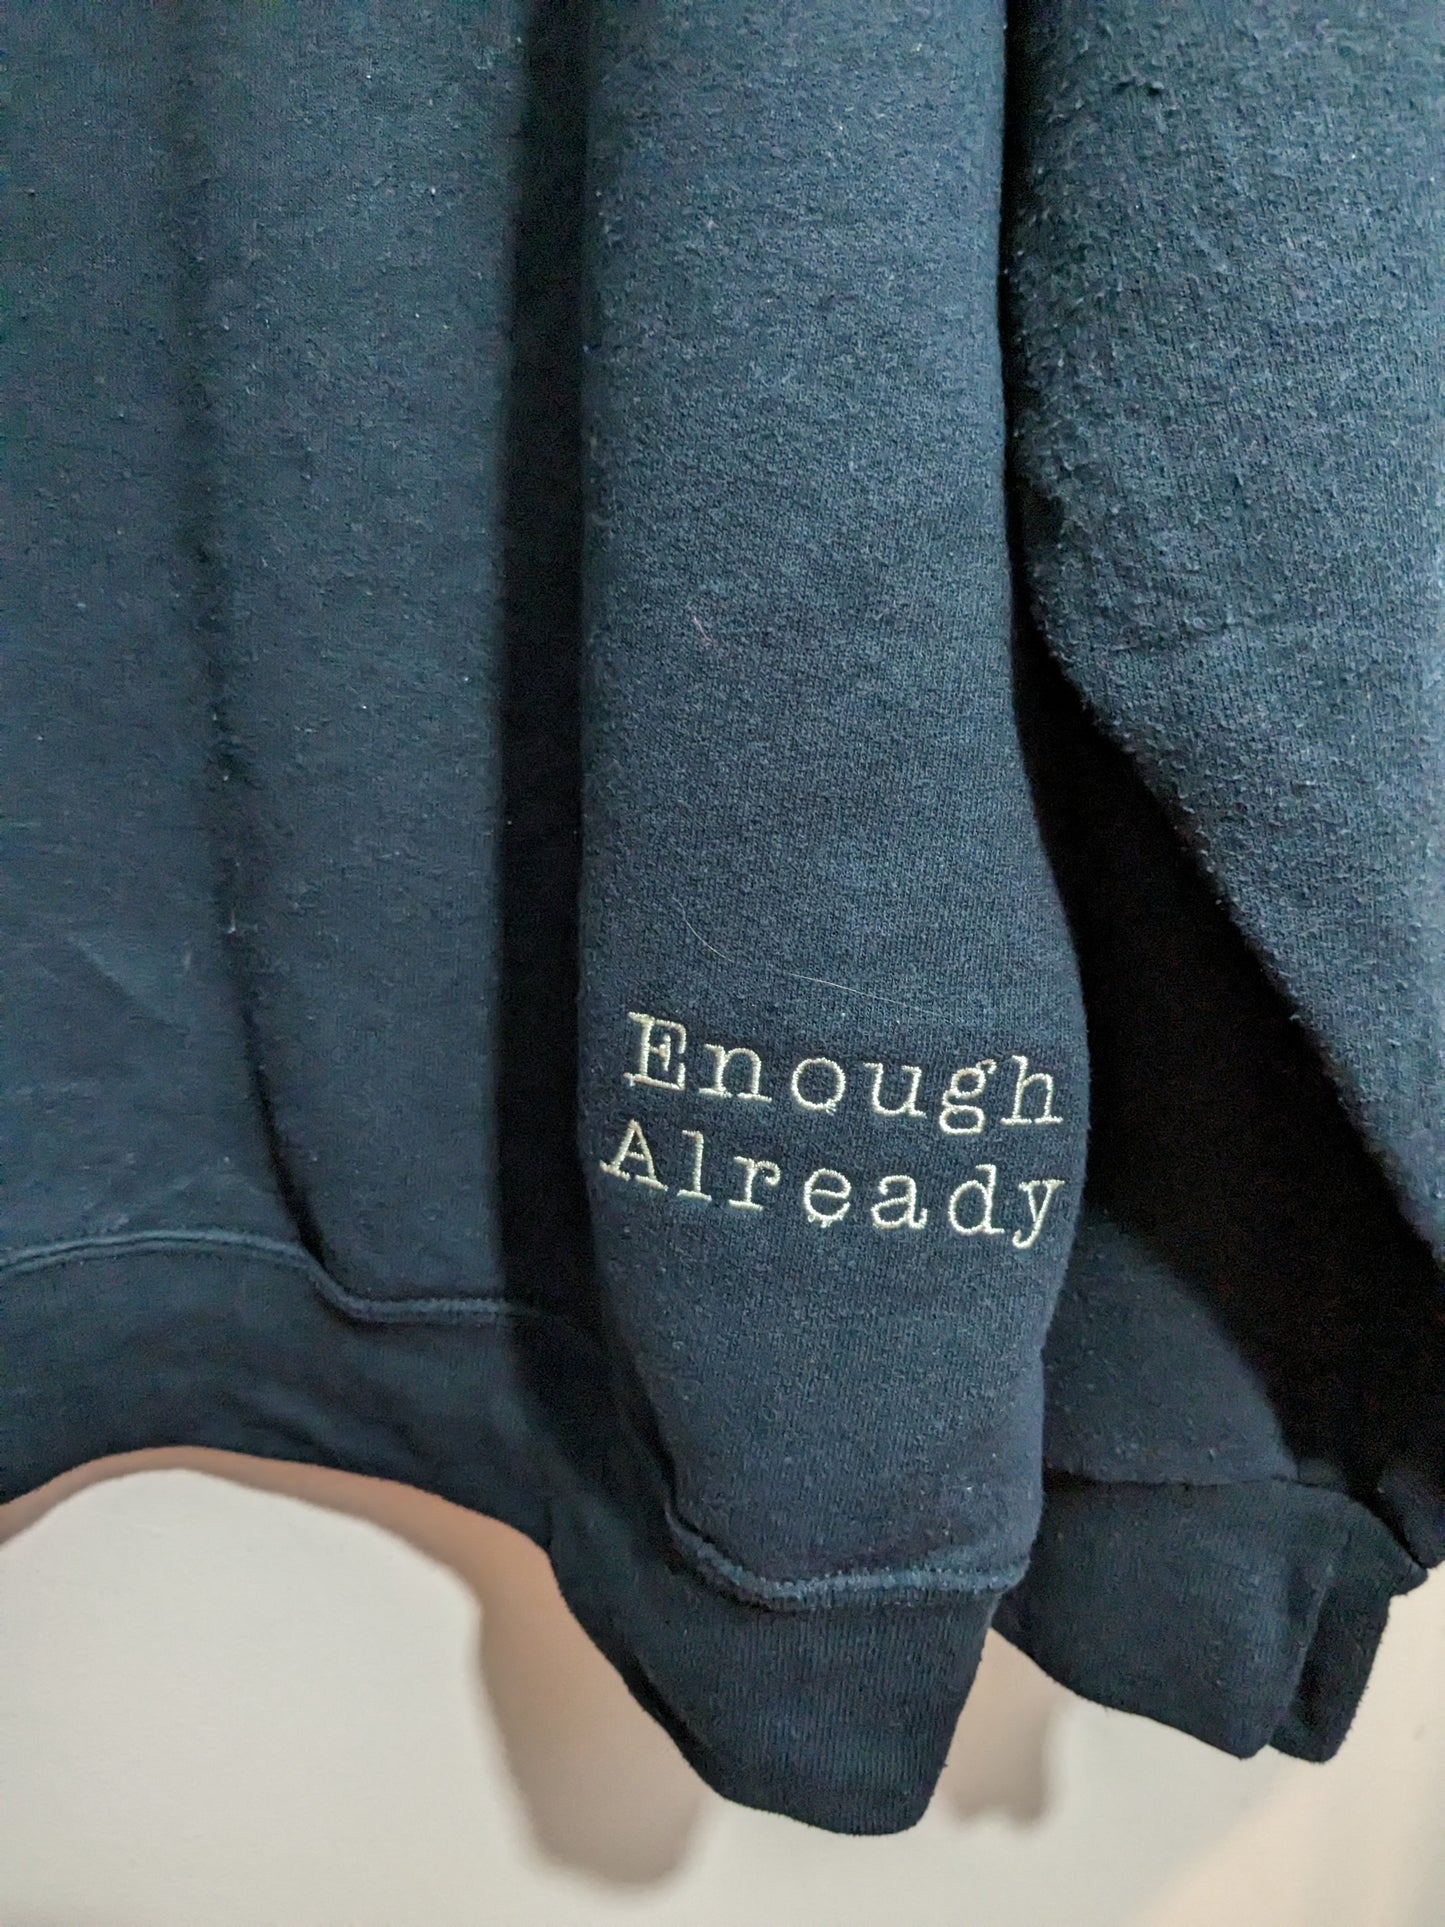 3XL Black Reclaimed Sweatshirt - Embroidered Oscar Wilde Quirky Fork Quote -